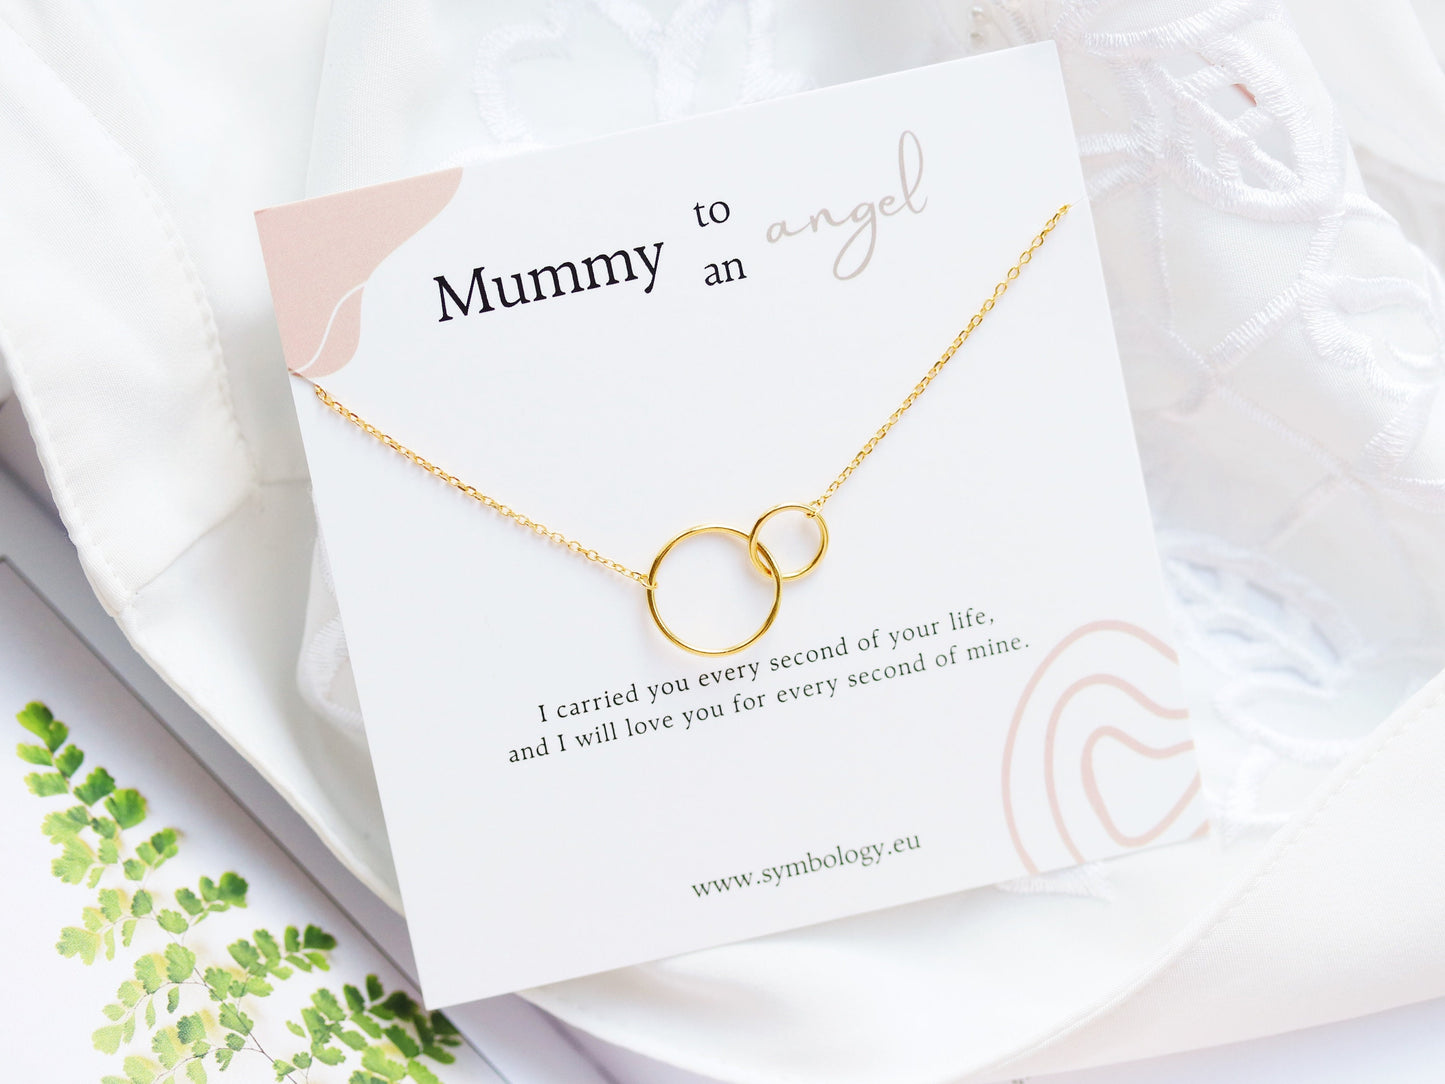 Miscarriage Necklace Gift for Her, Sterling Silver Interlinked Circle Stillborn Gift, Pregnancy Loss Bereavement Gift, Mama of an Angel